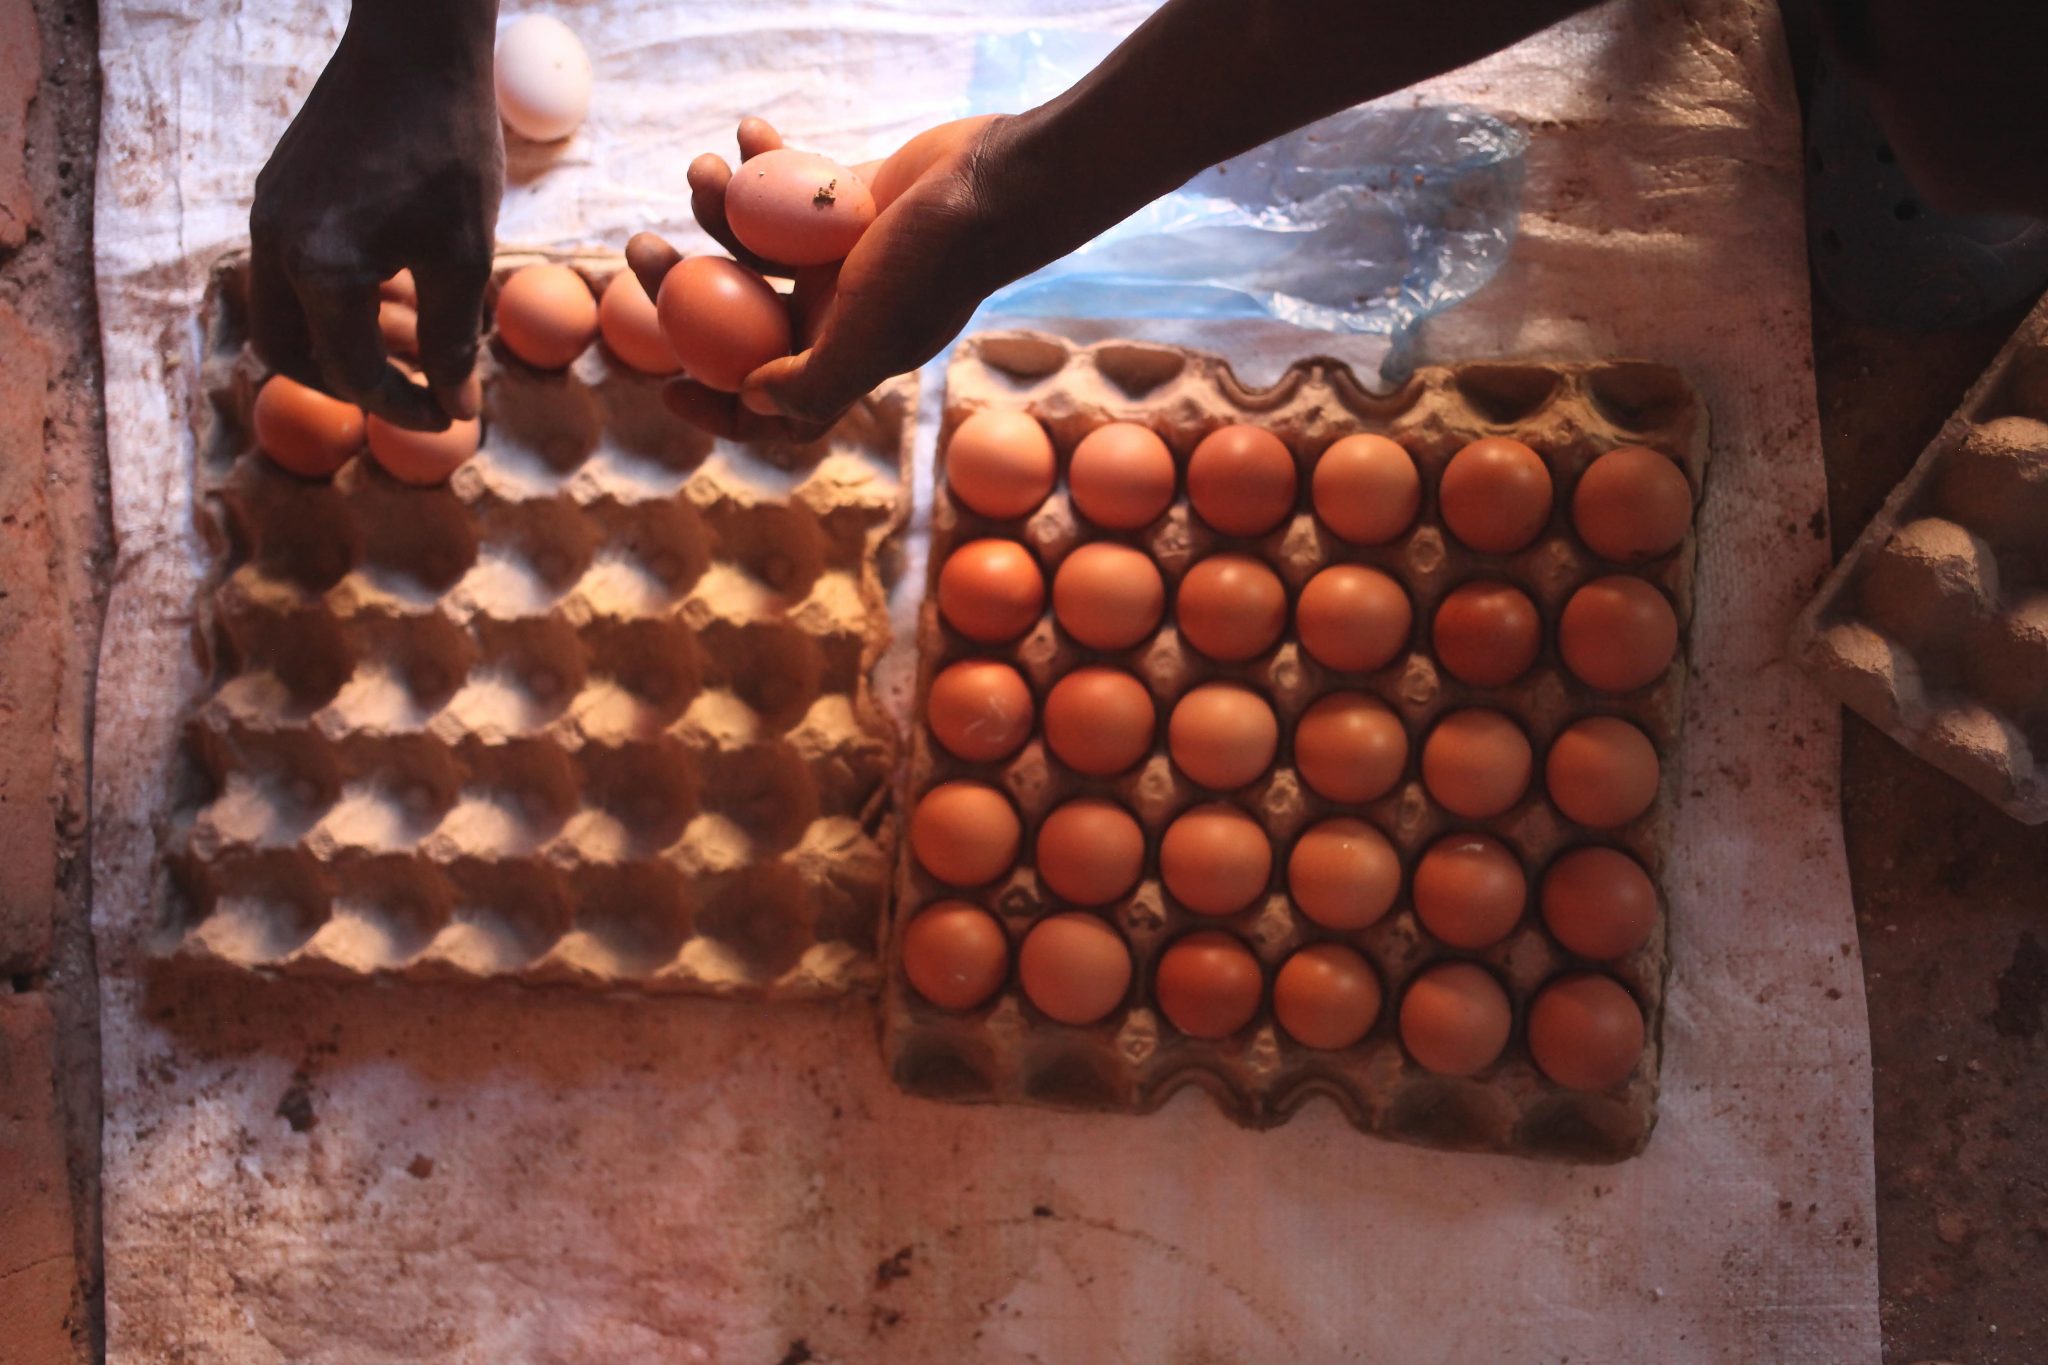 Egg Hub: A scalable and replicable model to enable local farmers, make protein nutrition affordable